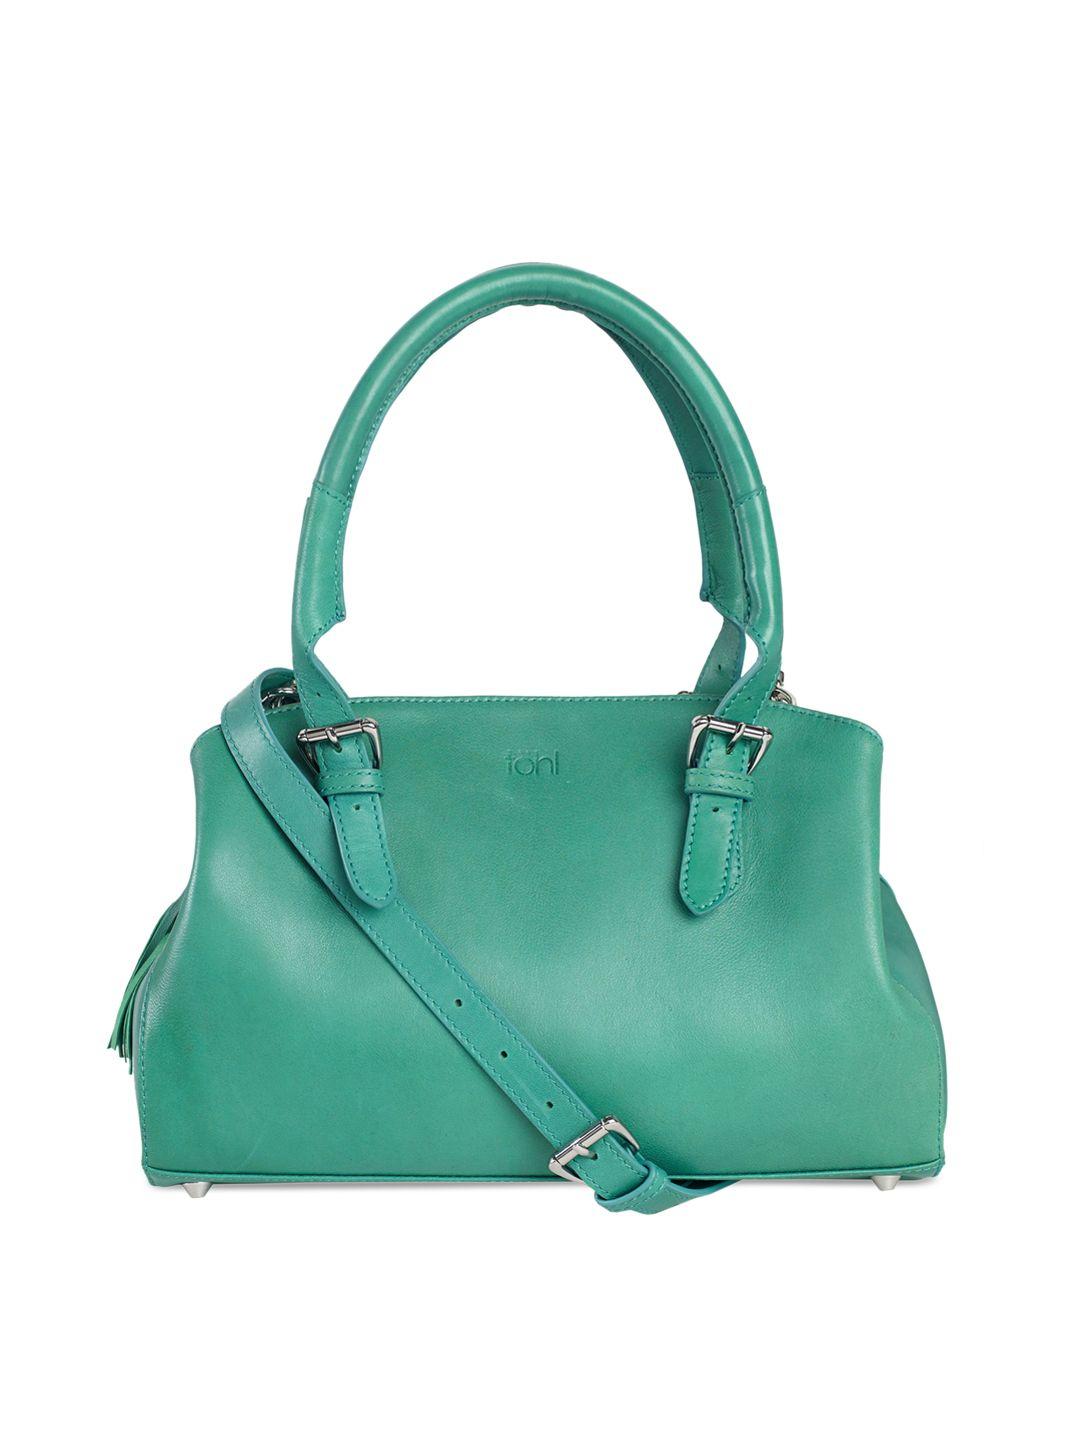 tohl green solid leather handheld bag